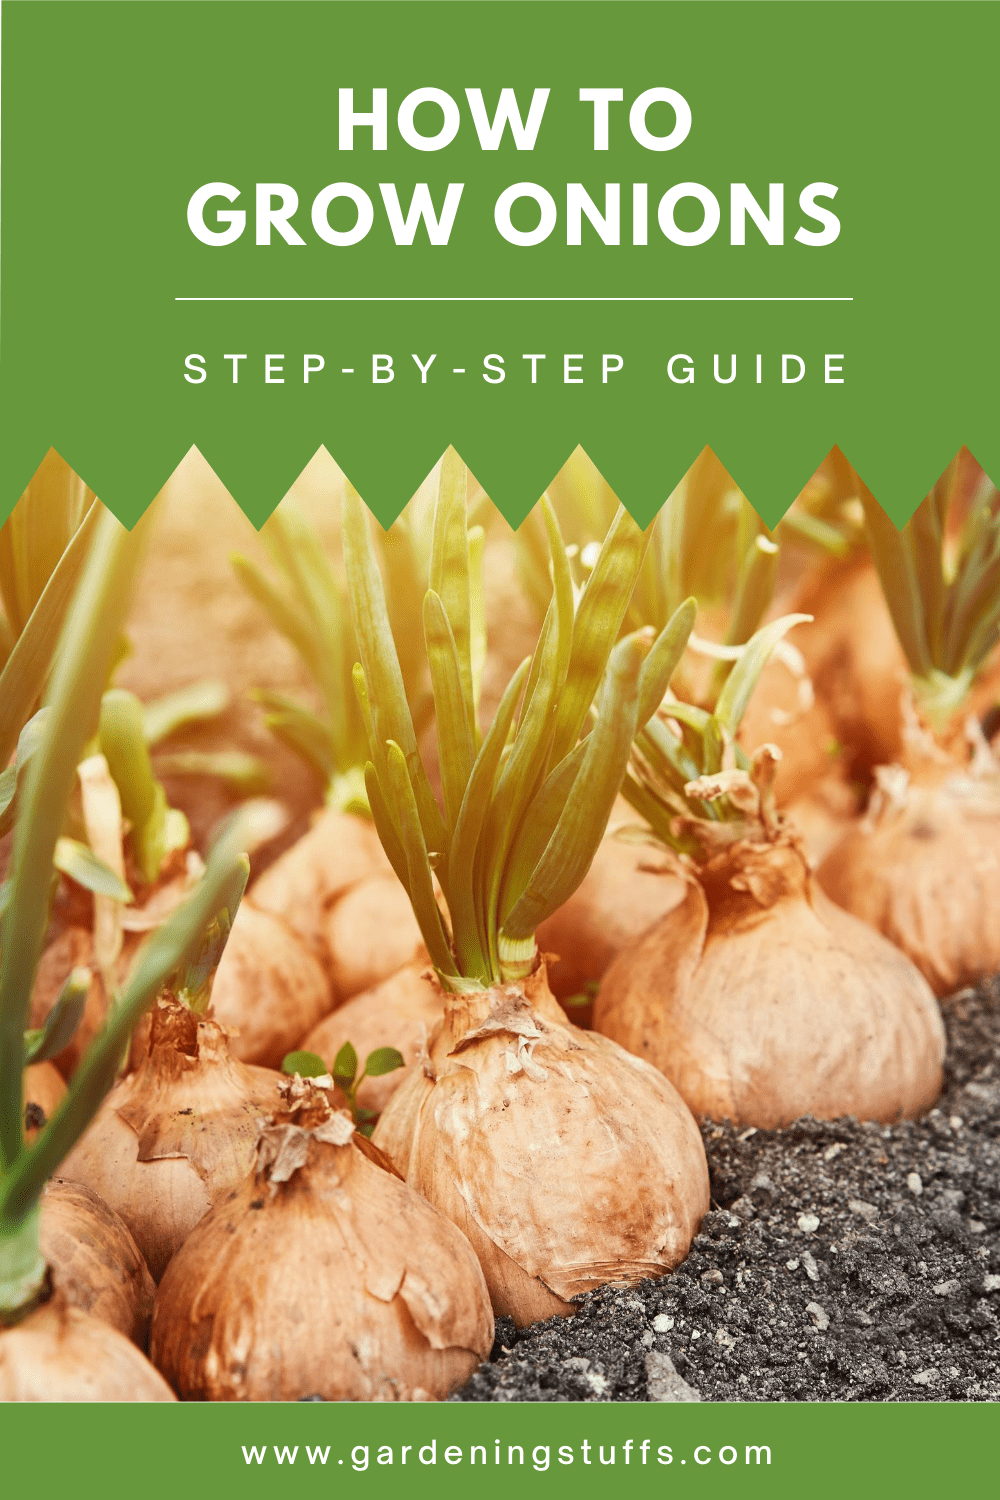 If you’ve ever considered starting your own vegetable garden, chances are onions were one of the first crops you considered. But it can be difficult knowing where to start. Read this guide if you want to learn how to grow, care for, and harvest onions.